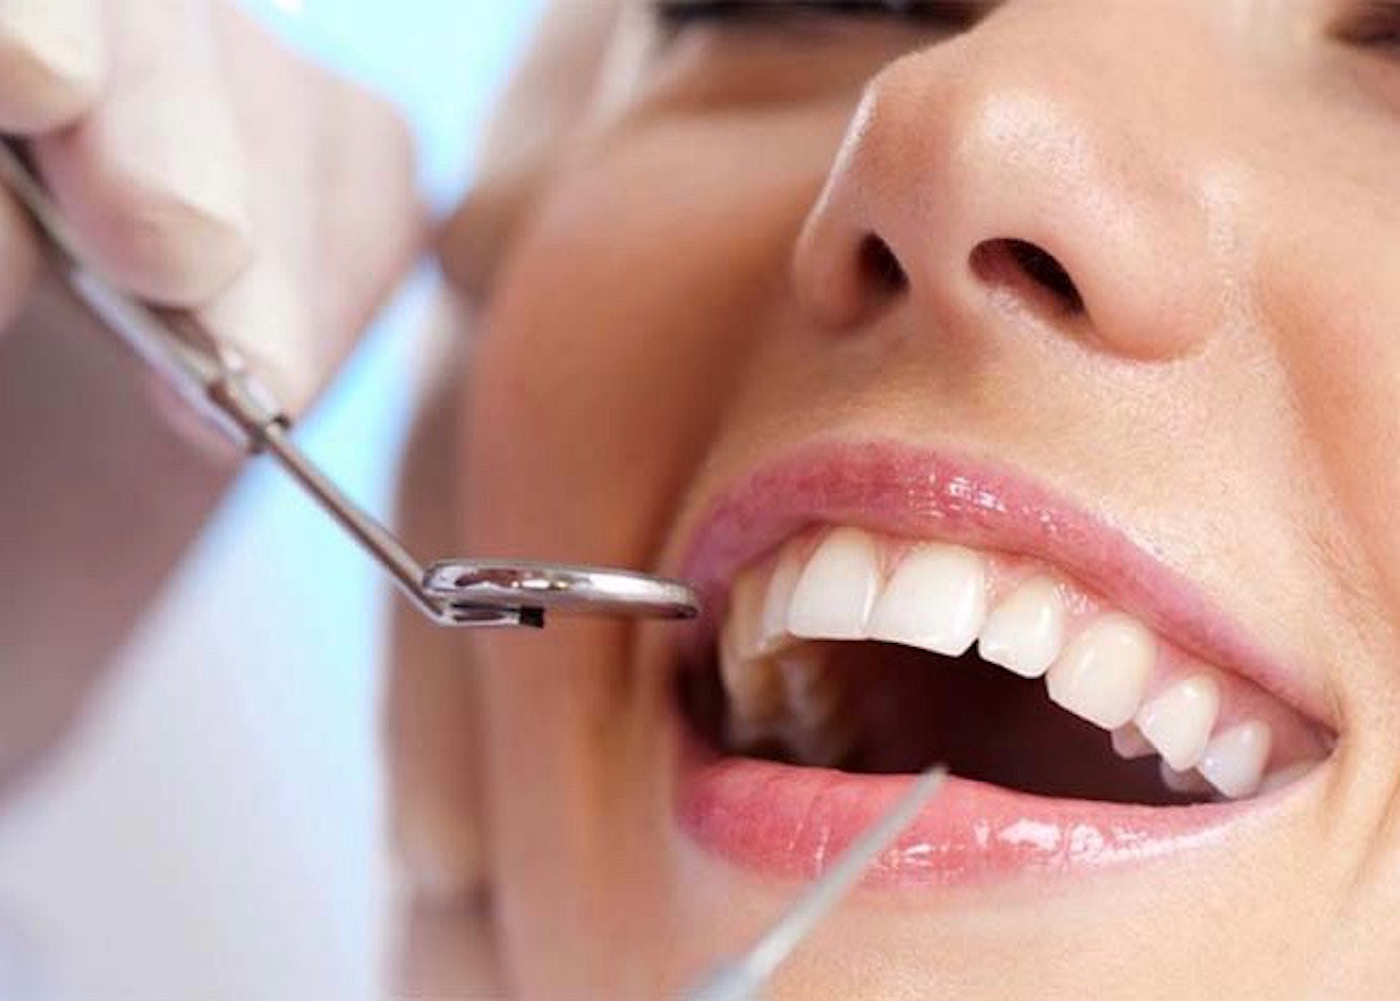 Learn the basis of root canal treatment